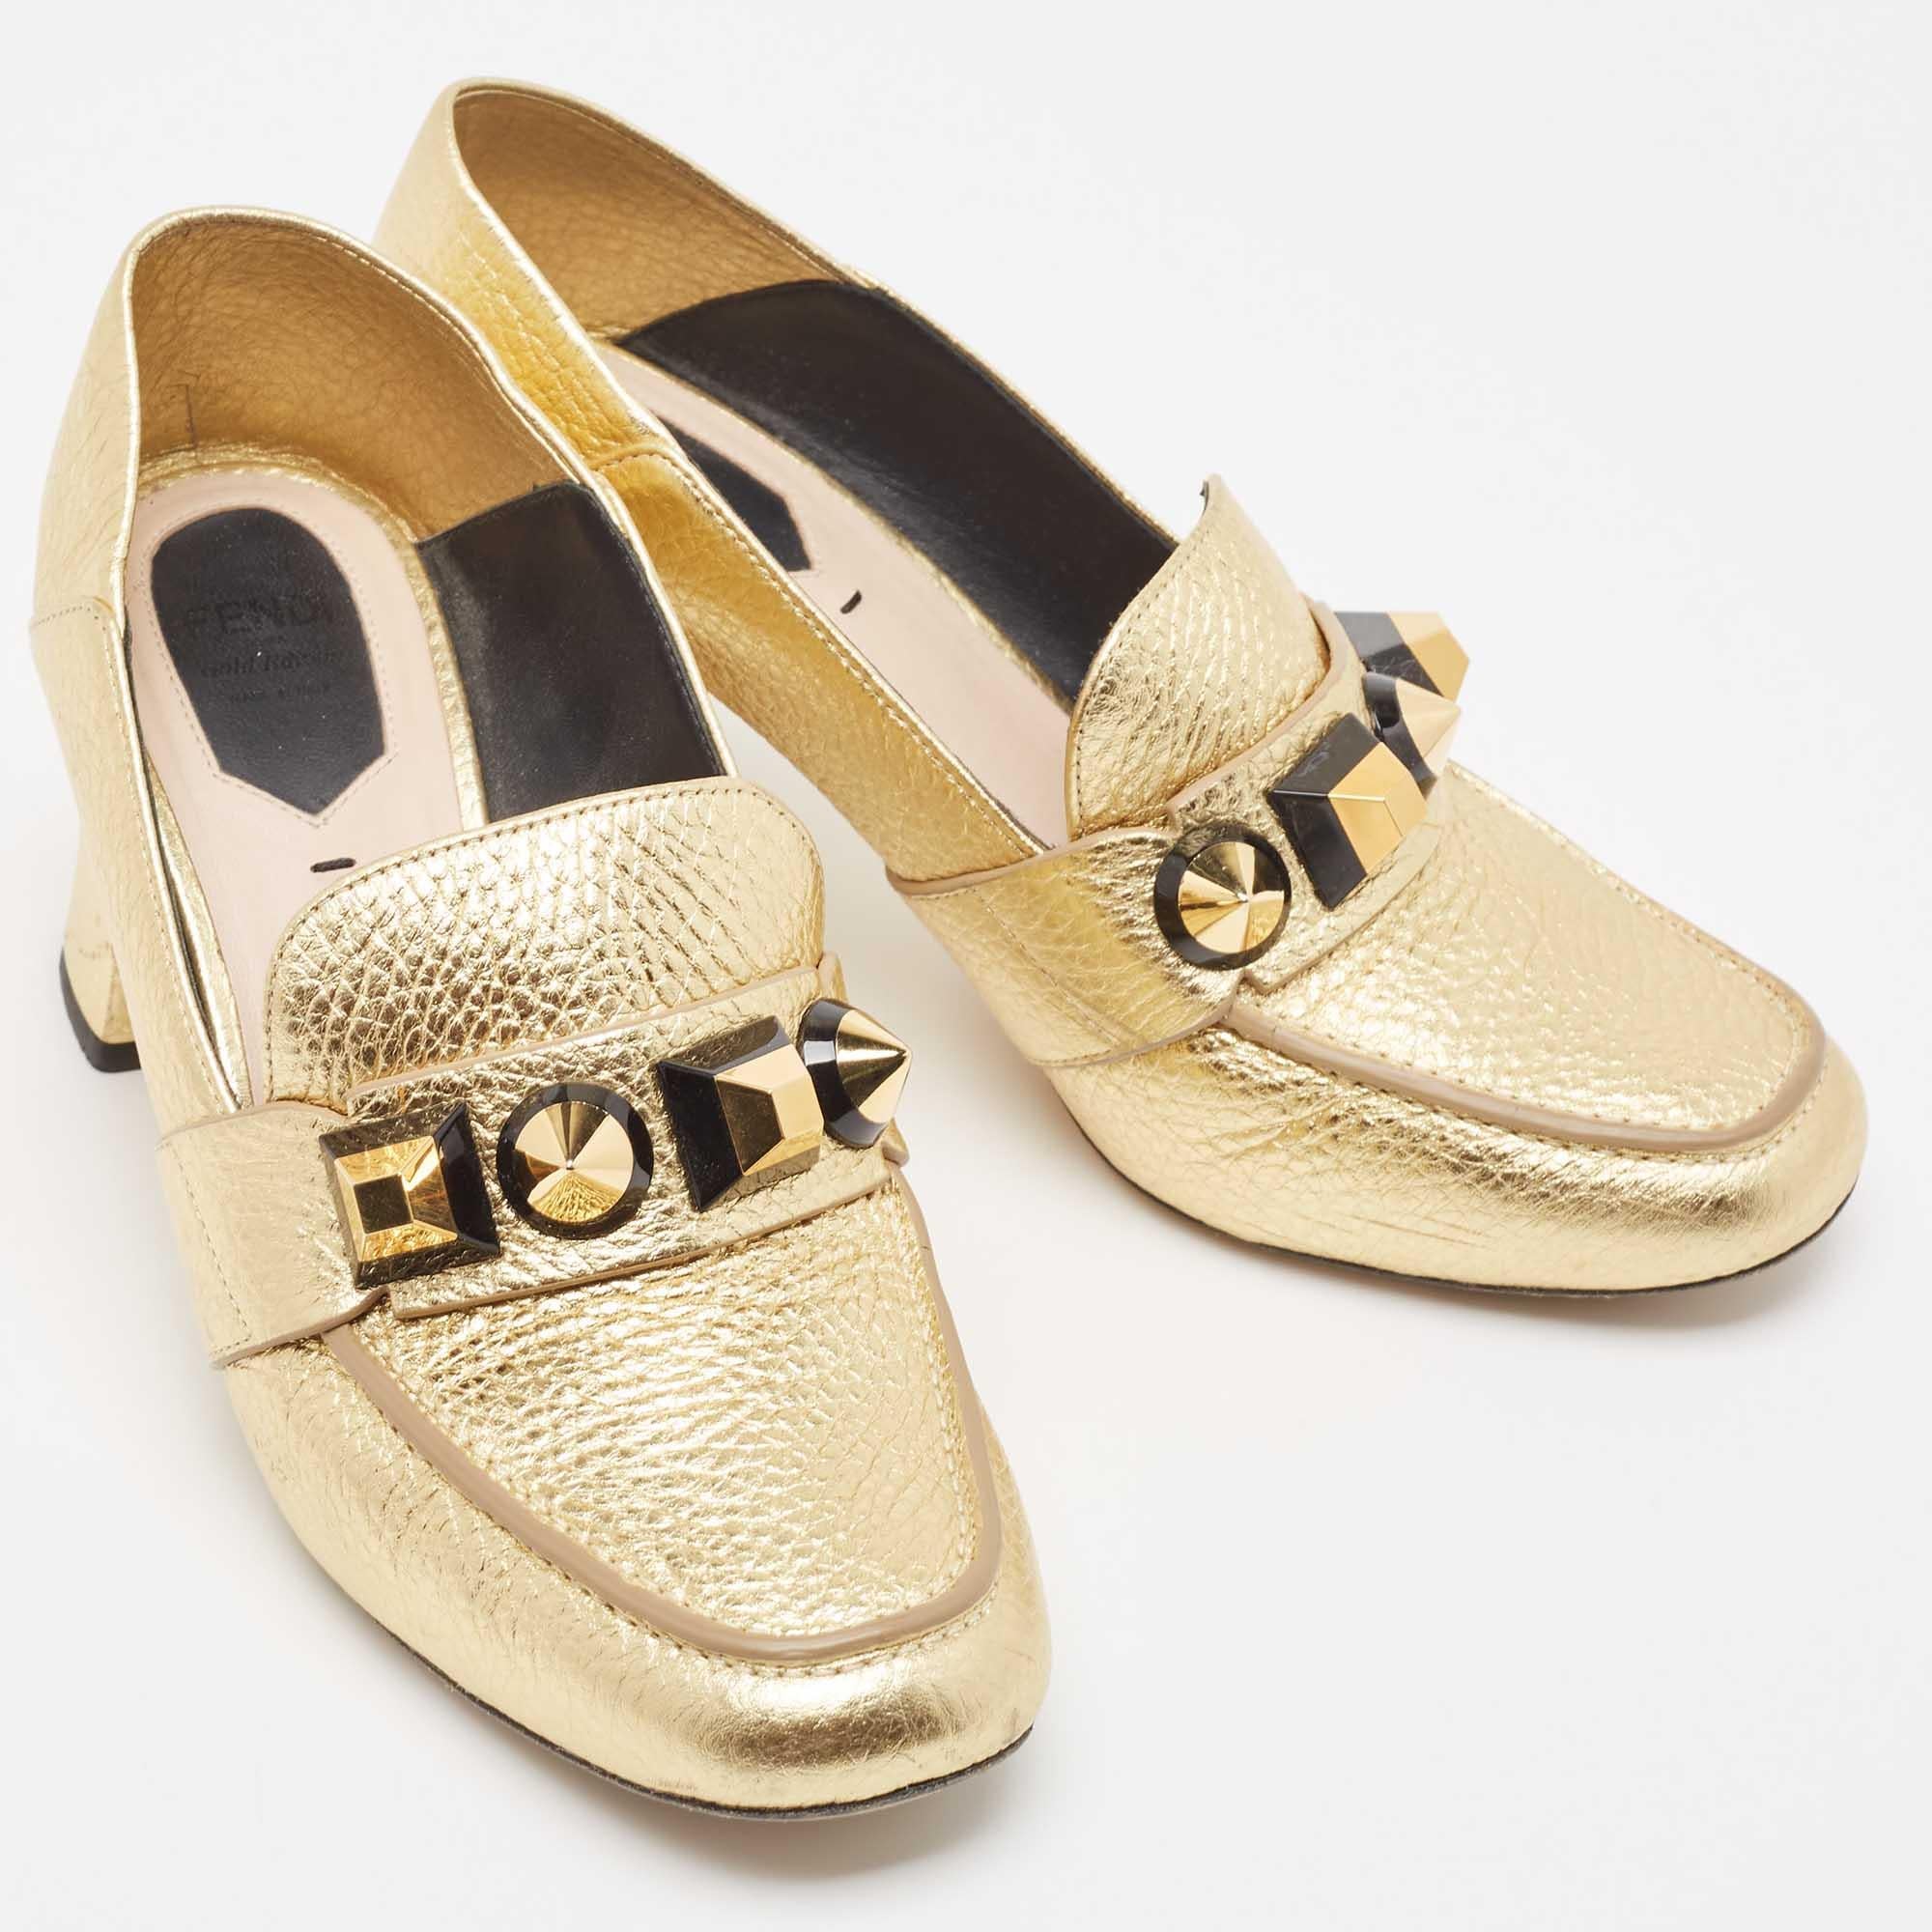 Fendi Gold textured Leather Geometric Stud Loafer Pumps Size 38.5 For Sale 2